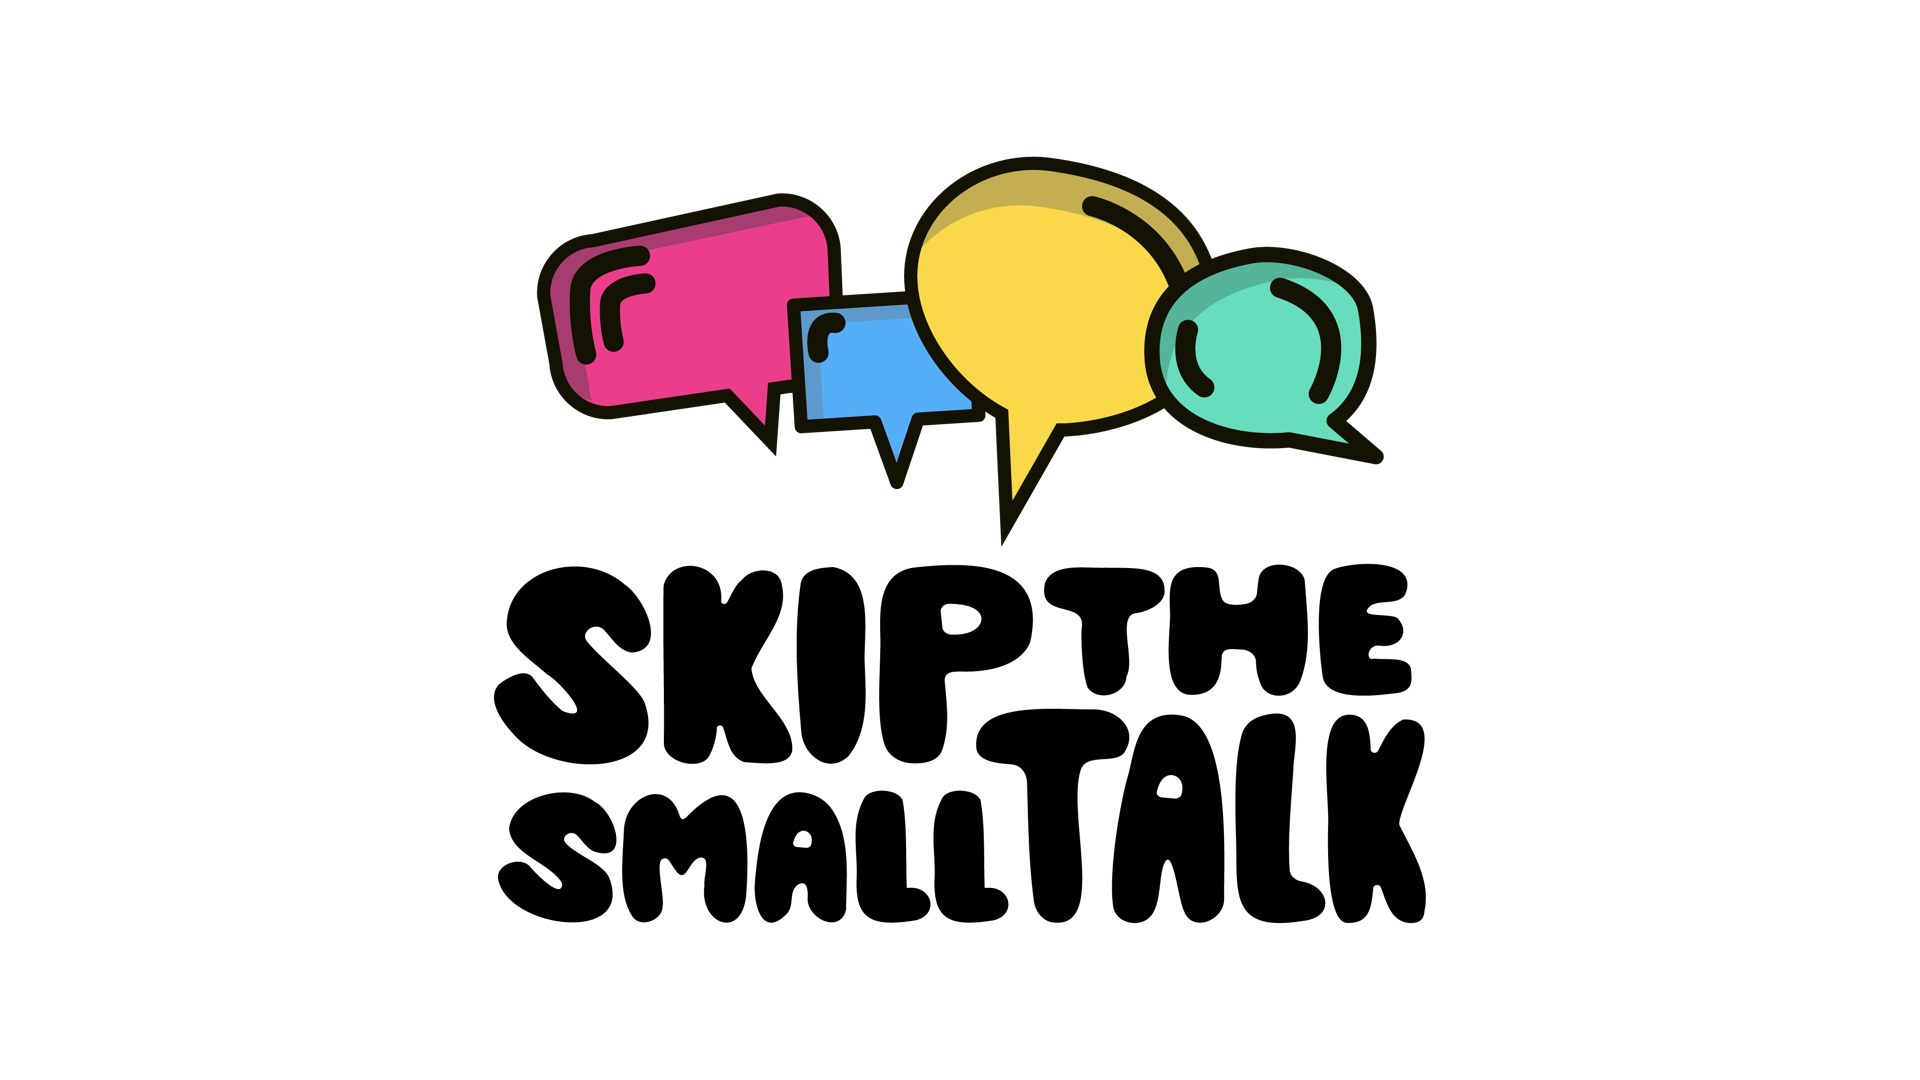 Chat with no small talk